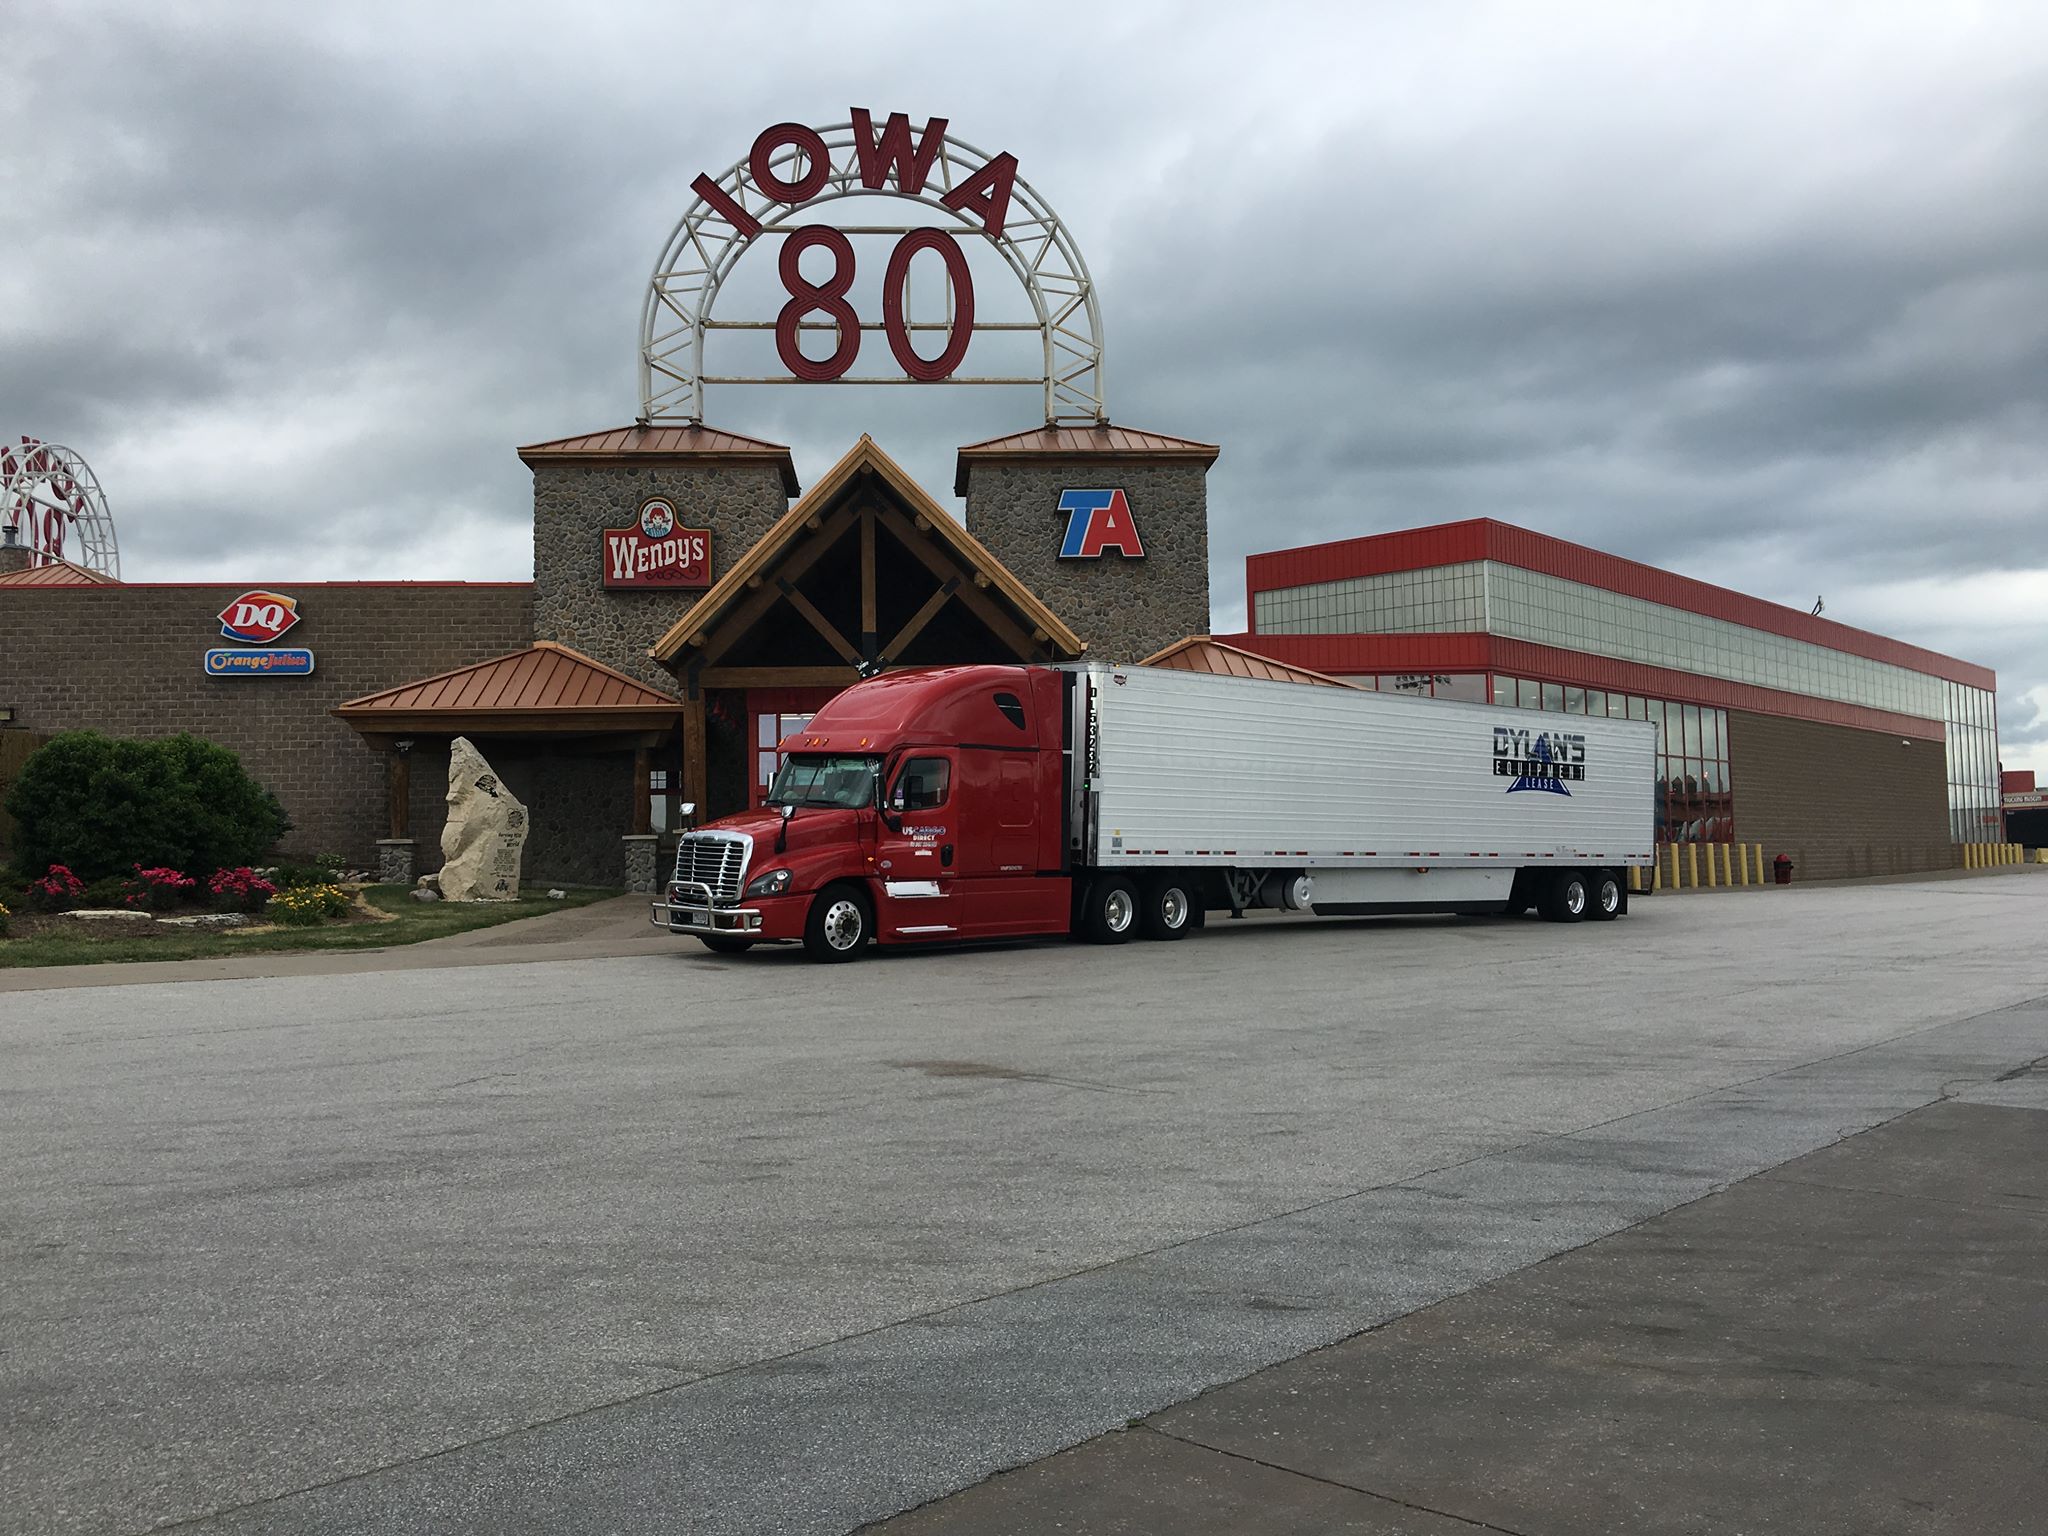 What defines a truck stop? 